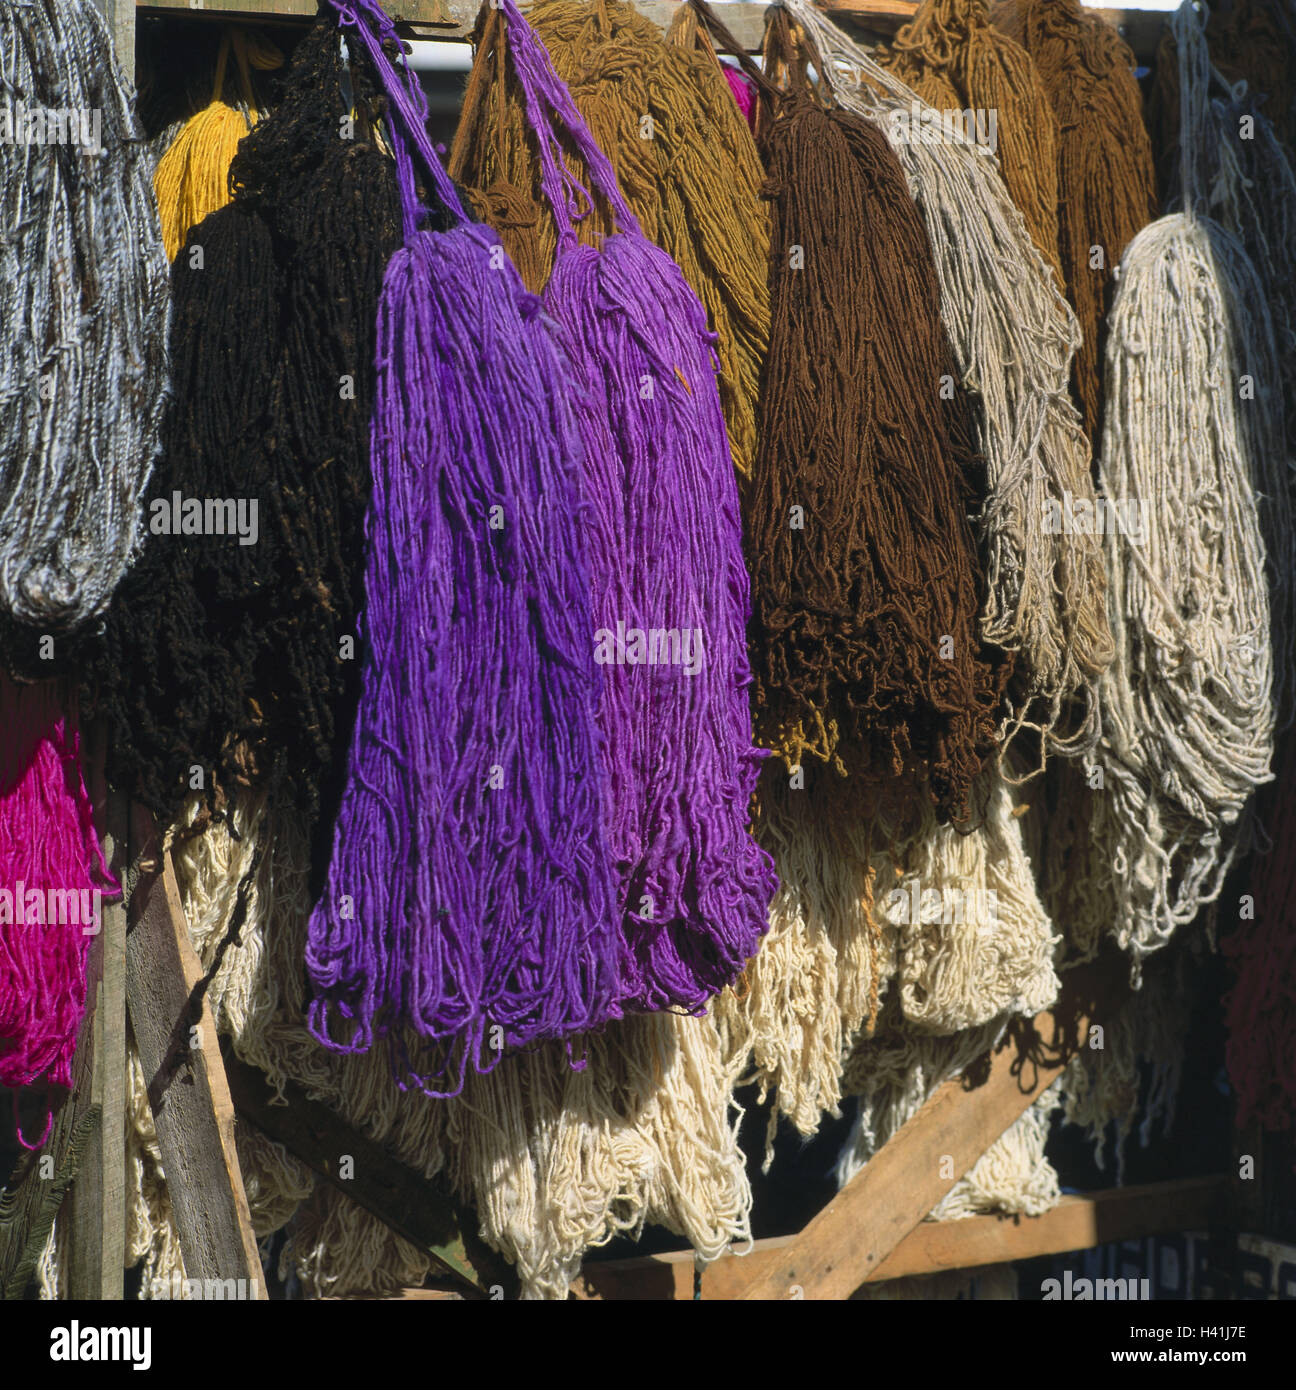 Chile, Chiloe island, Dalcahue, sales, wool, colours, differently, South America, region de off Lagos, cotton, economy, export article, product photography, market, commodity, outside Stock Photo